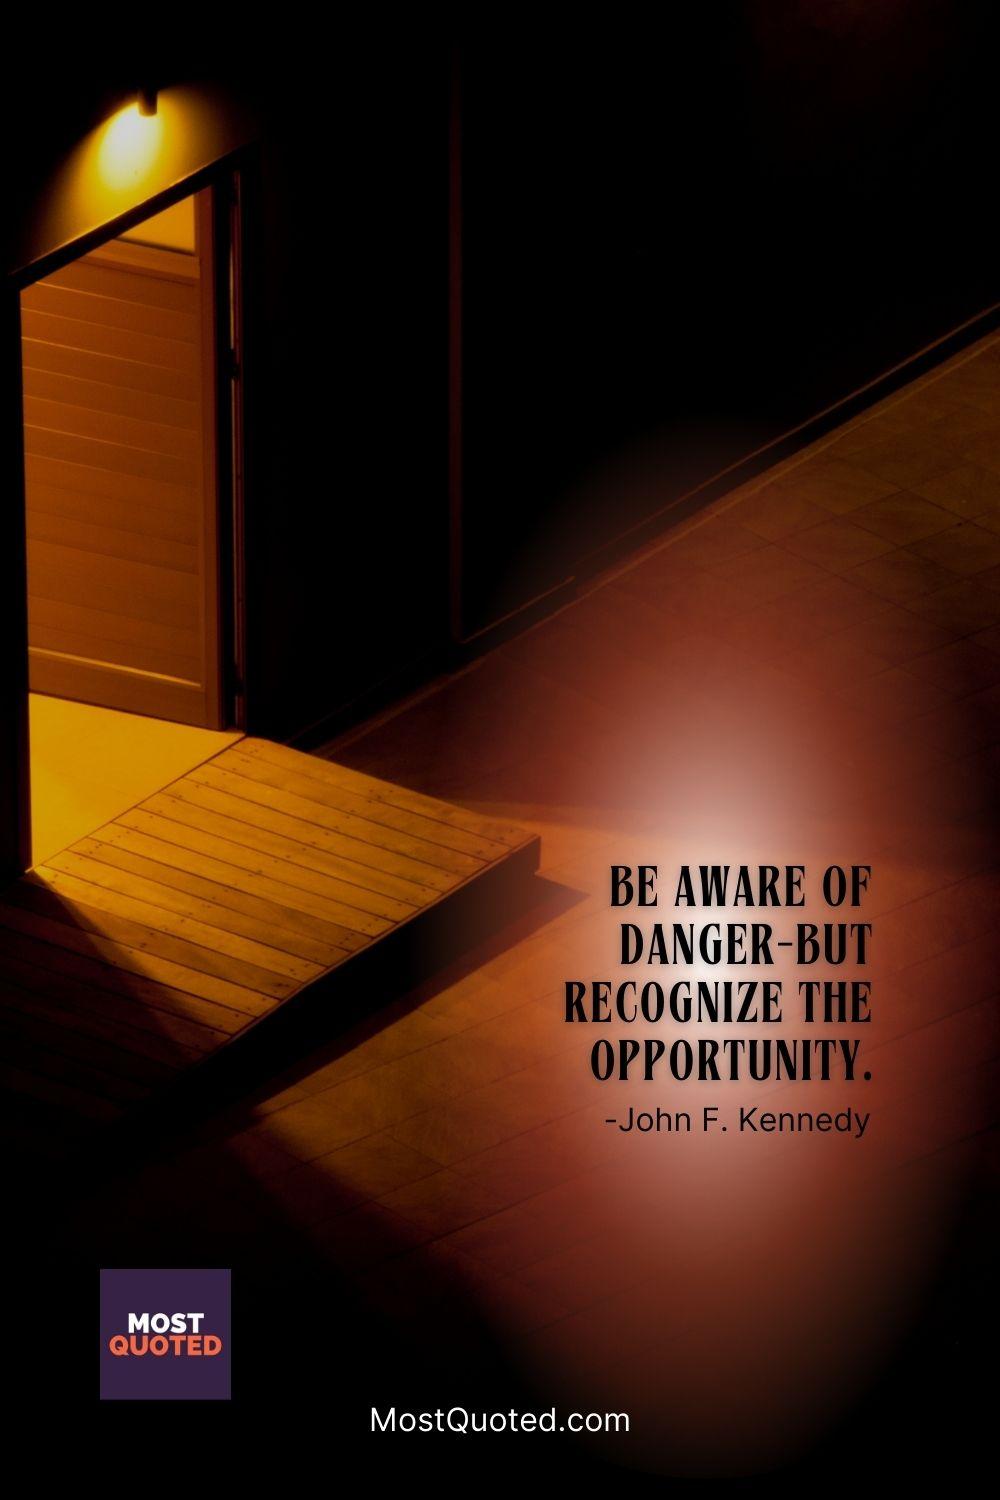 Be aware of danger-but recognize the opportunity. - John F. Kennedy